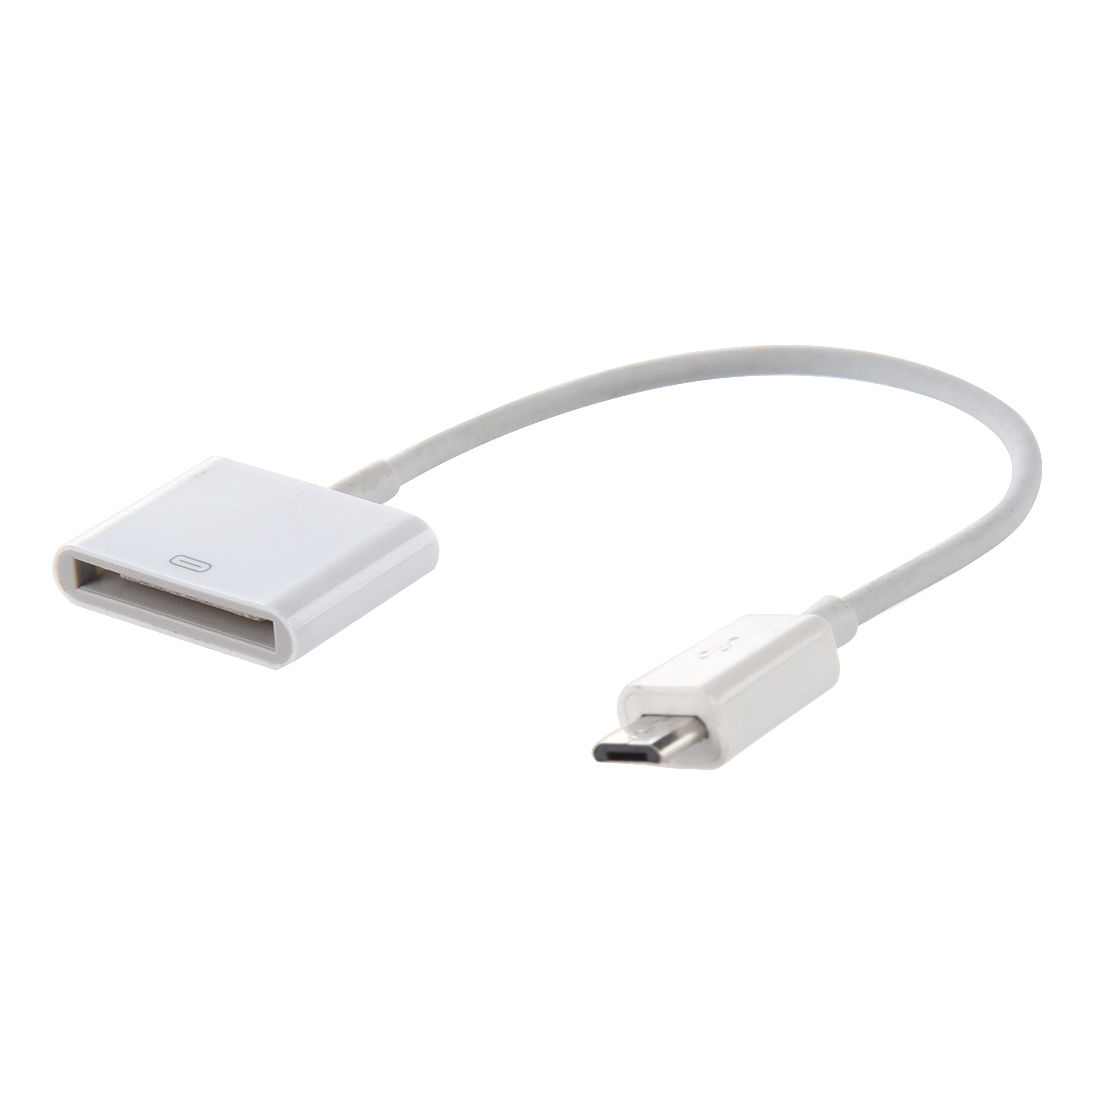 Apple D2G1 AC Adapter Power Supply Cord Cable Charger